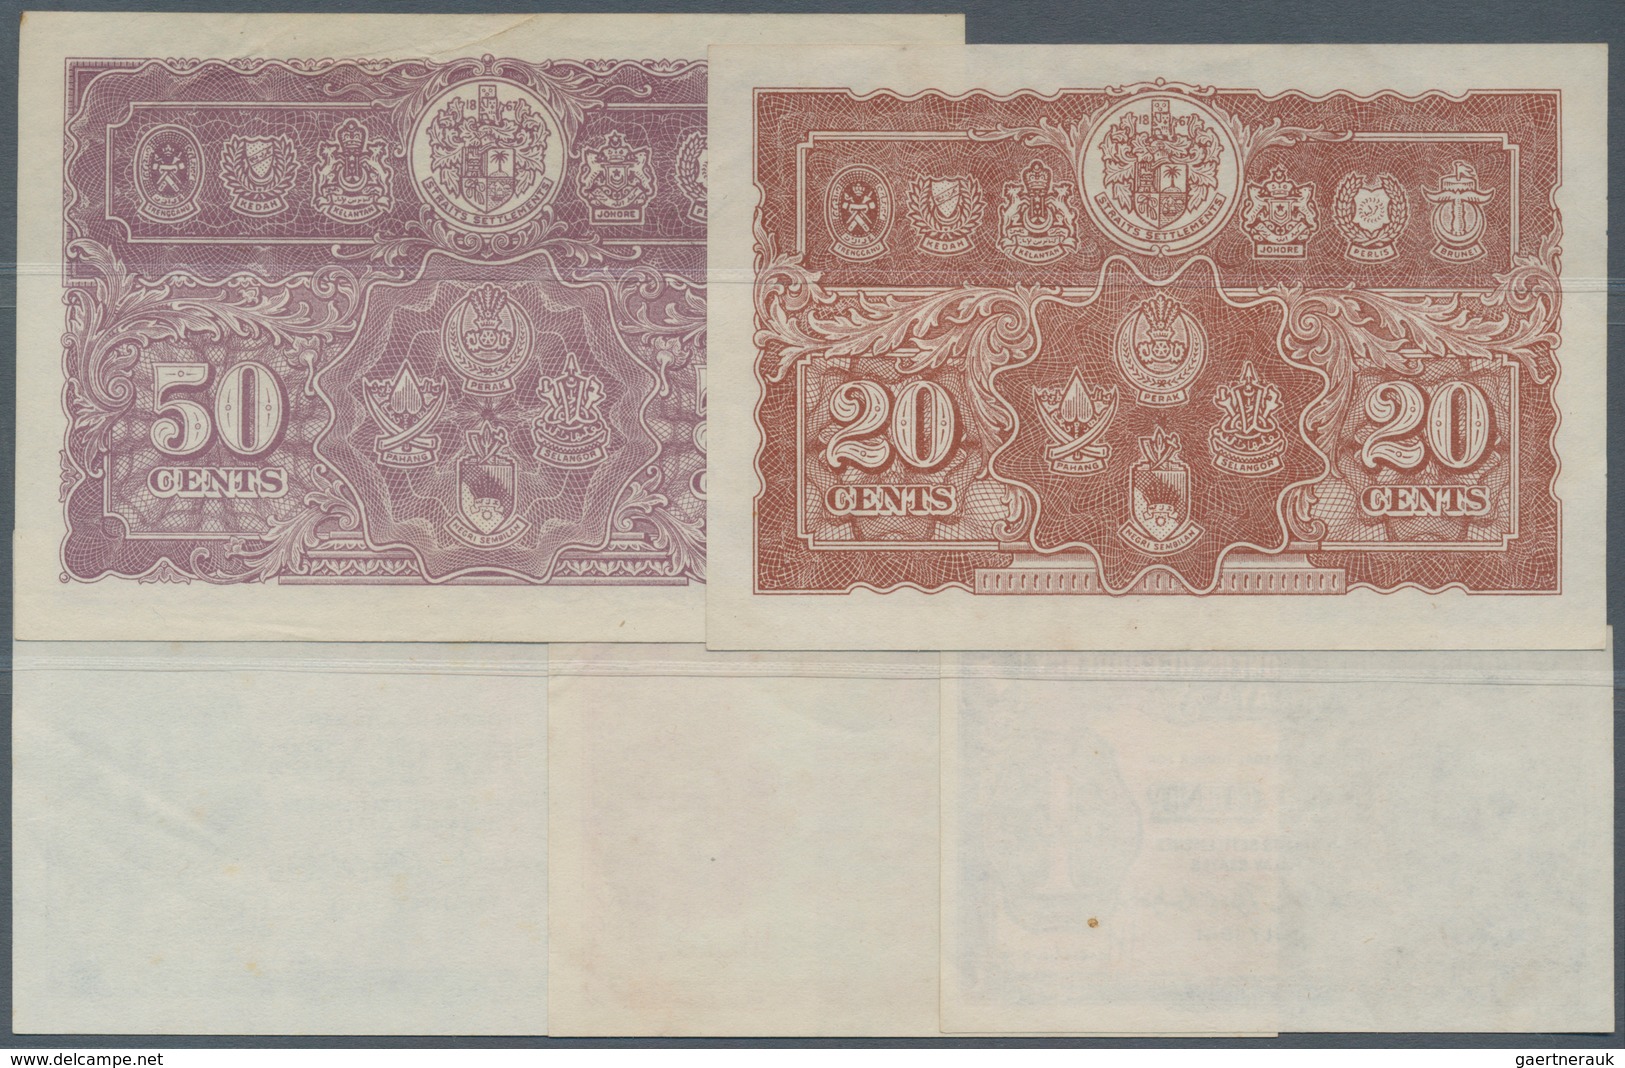 Malaya: Very Nice Set With 5 Banknotes 1, 5, 10, 20 And 50 Cents 1941, P.6-10 In VF To XF Condition. - Malaysia